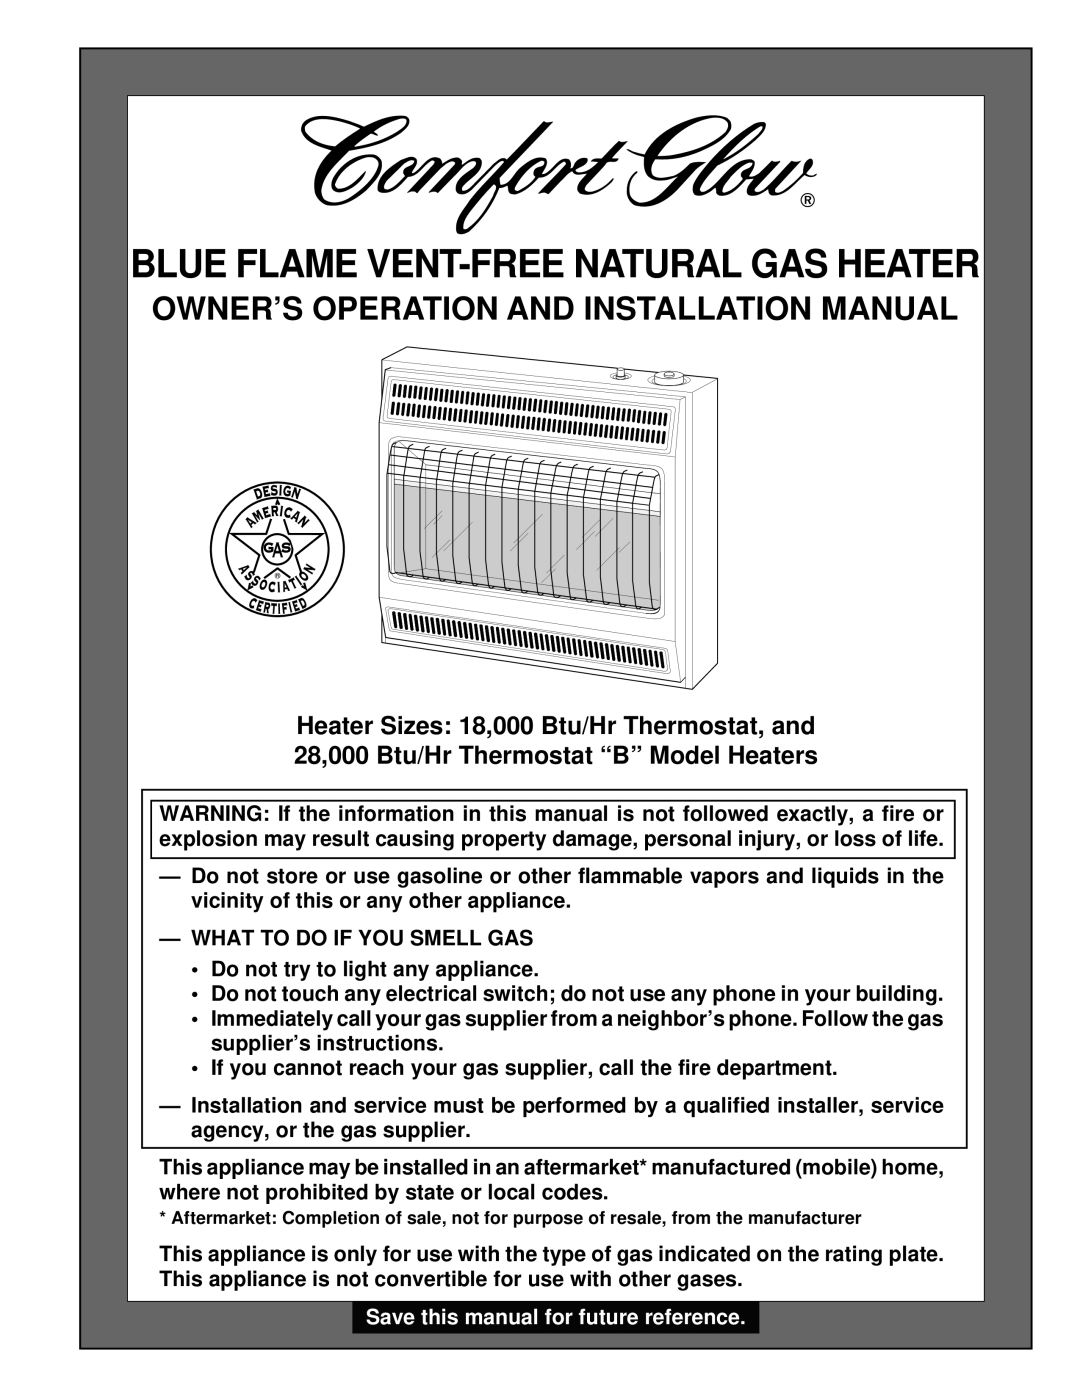 Desa Tech 28 installation manual Owner’S Operation And Installation Manual, Heater Sizes 18,000 Btu/Hr Thermostat, and 